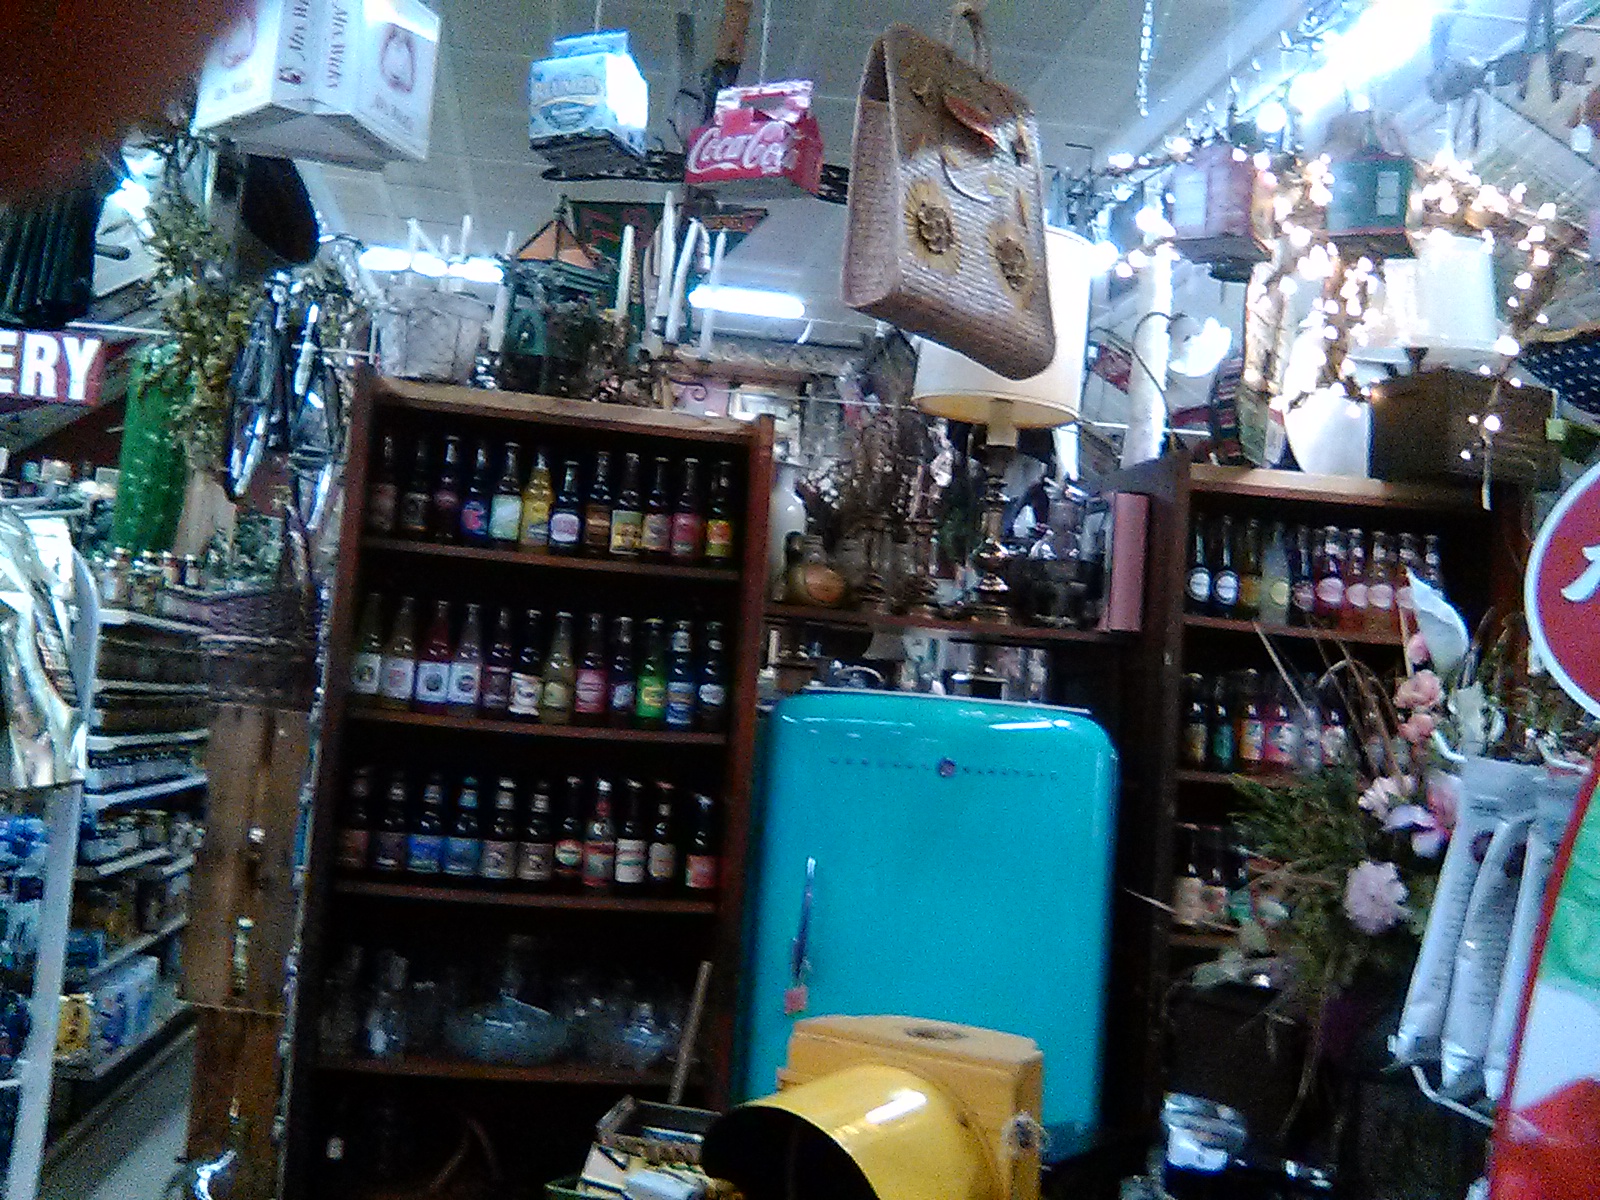 Minnich's Antiques and General Store